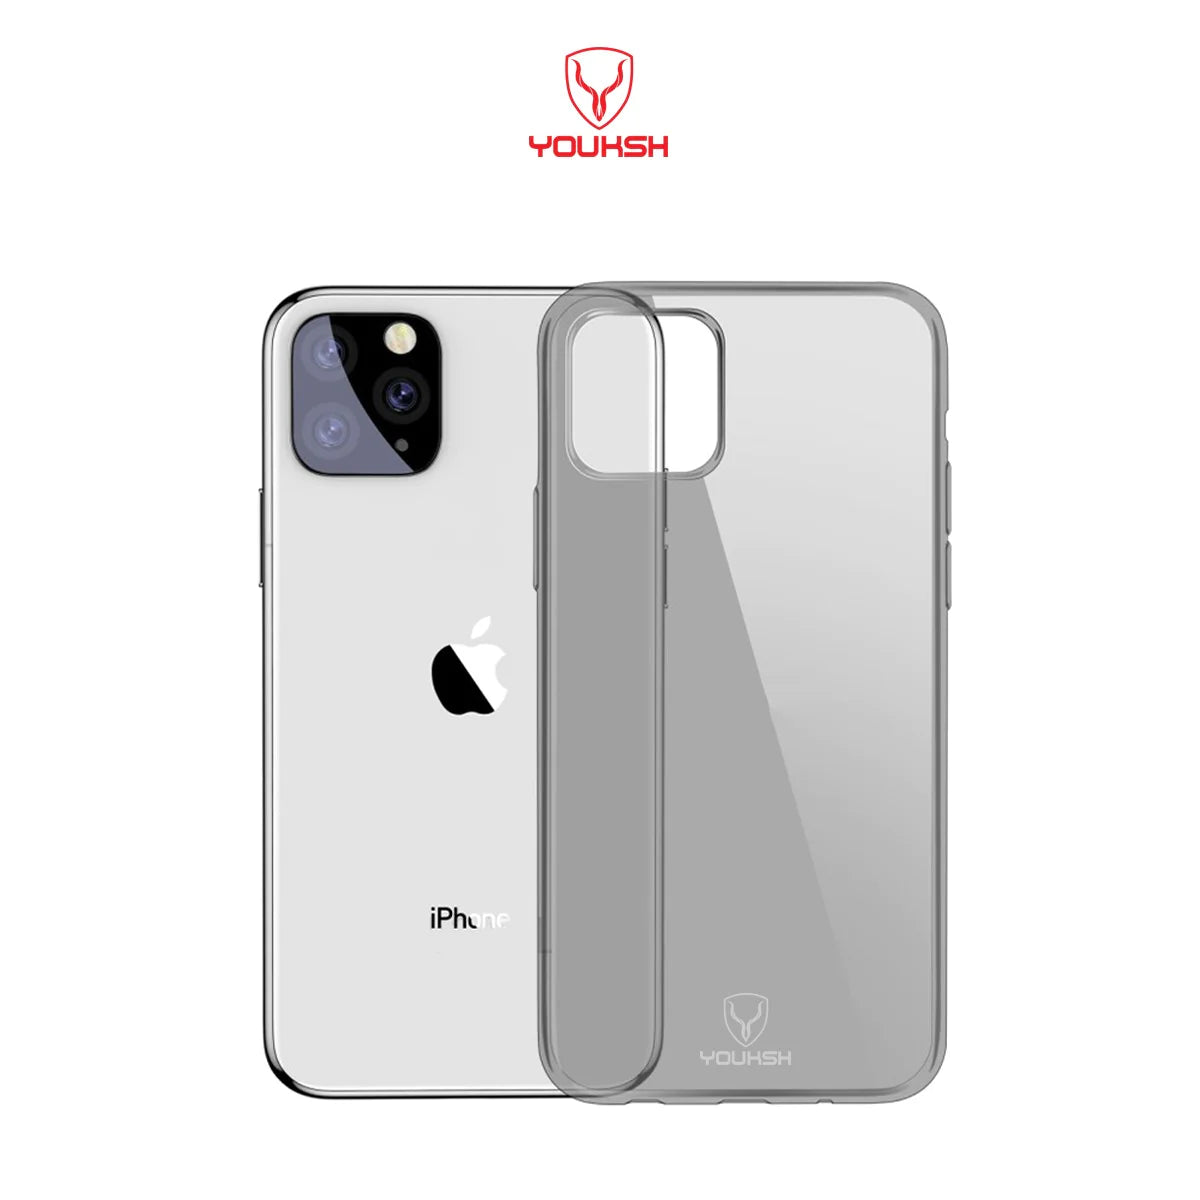 YOUKSH Apple iPhone 11 Pro Max Transparent Case | Soft Shock Proof Jelly Cover